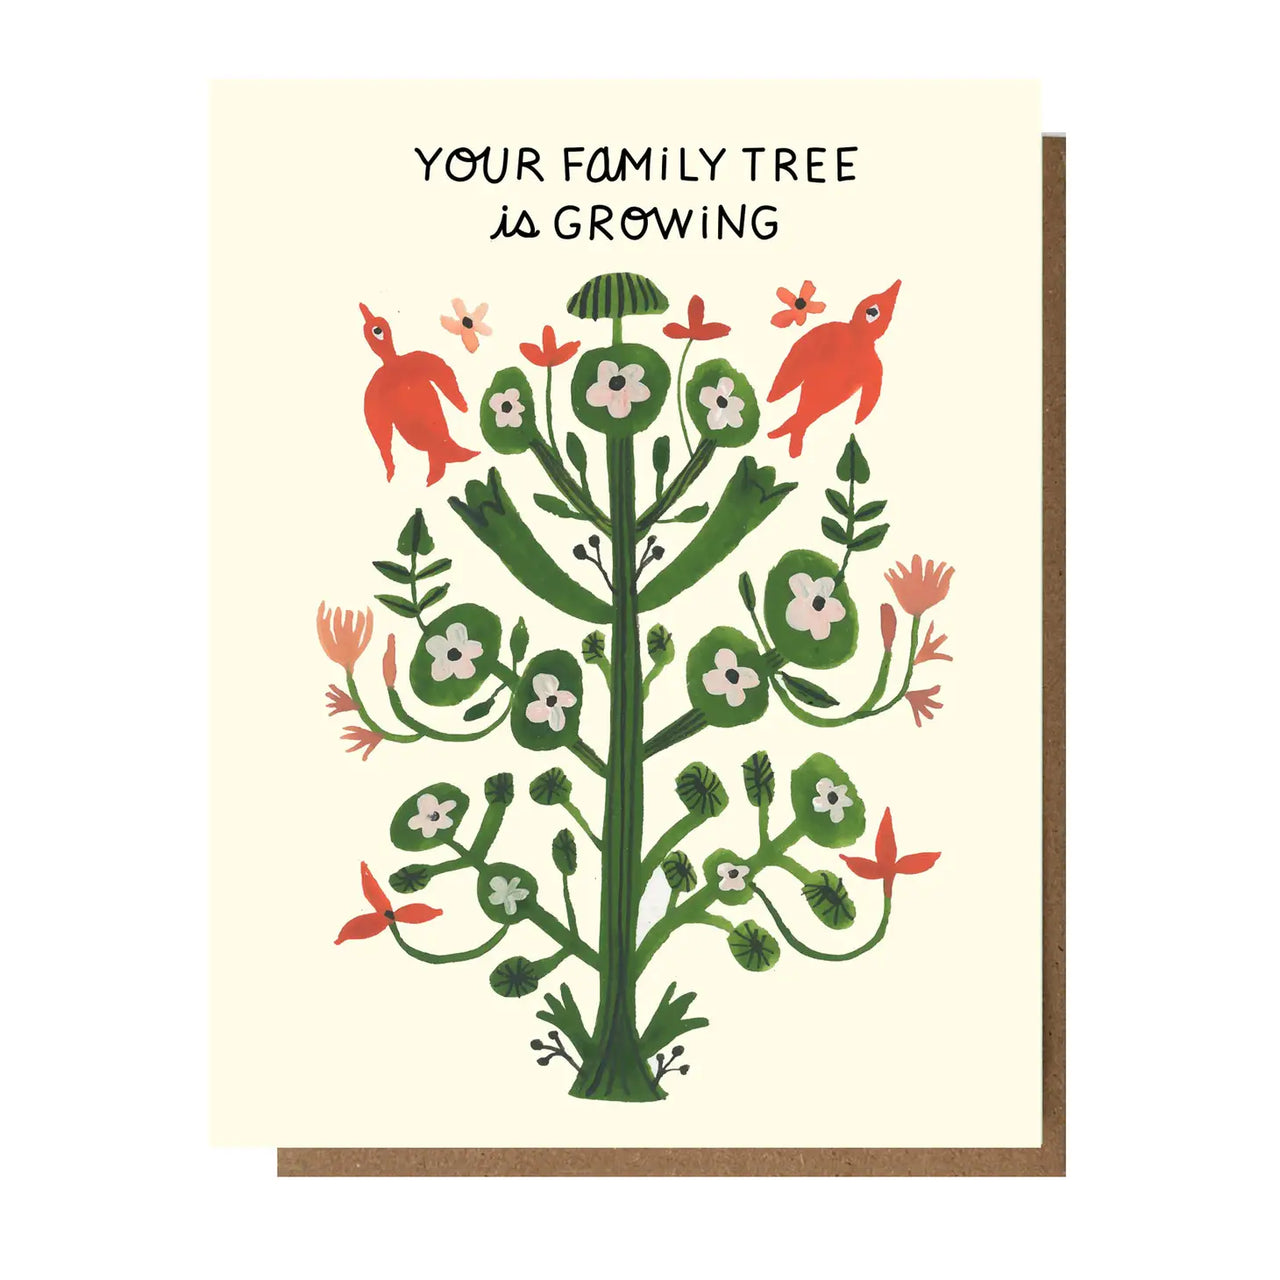 YOUR FAMILY TREE IS GROWING